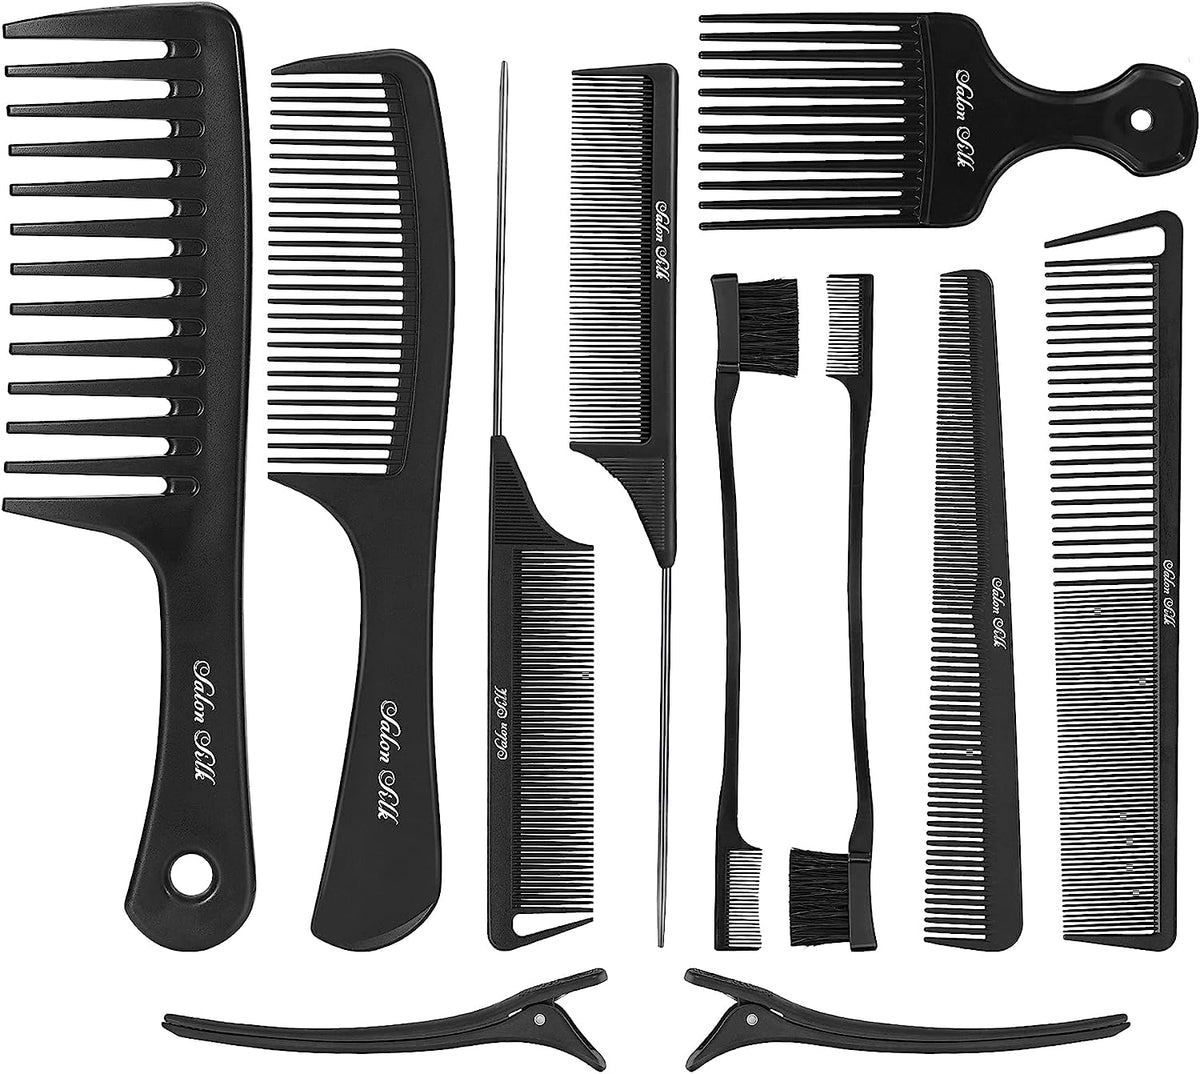 Salonsilk Professional Combs Set for Natural Black Curly Hair for Ladies